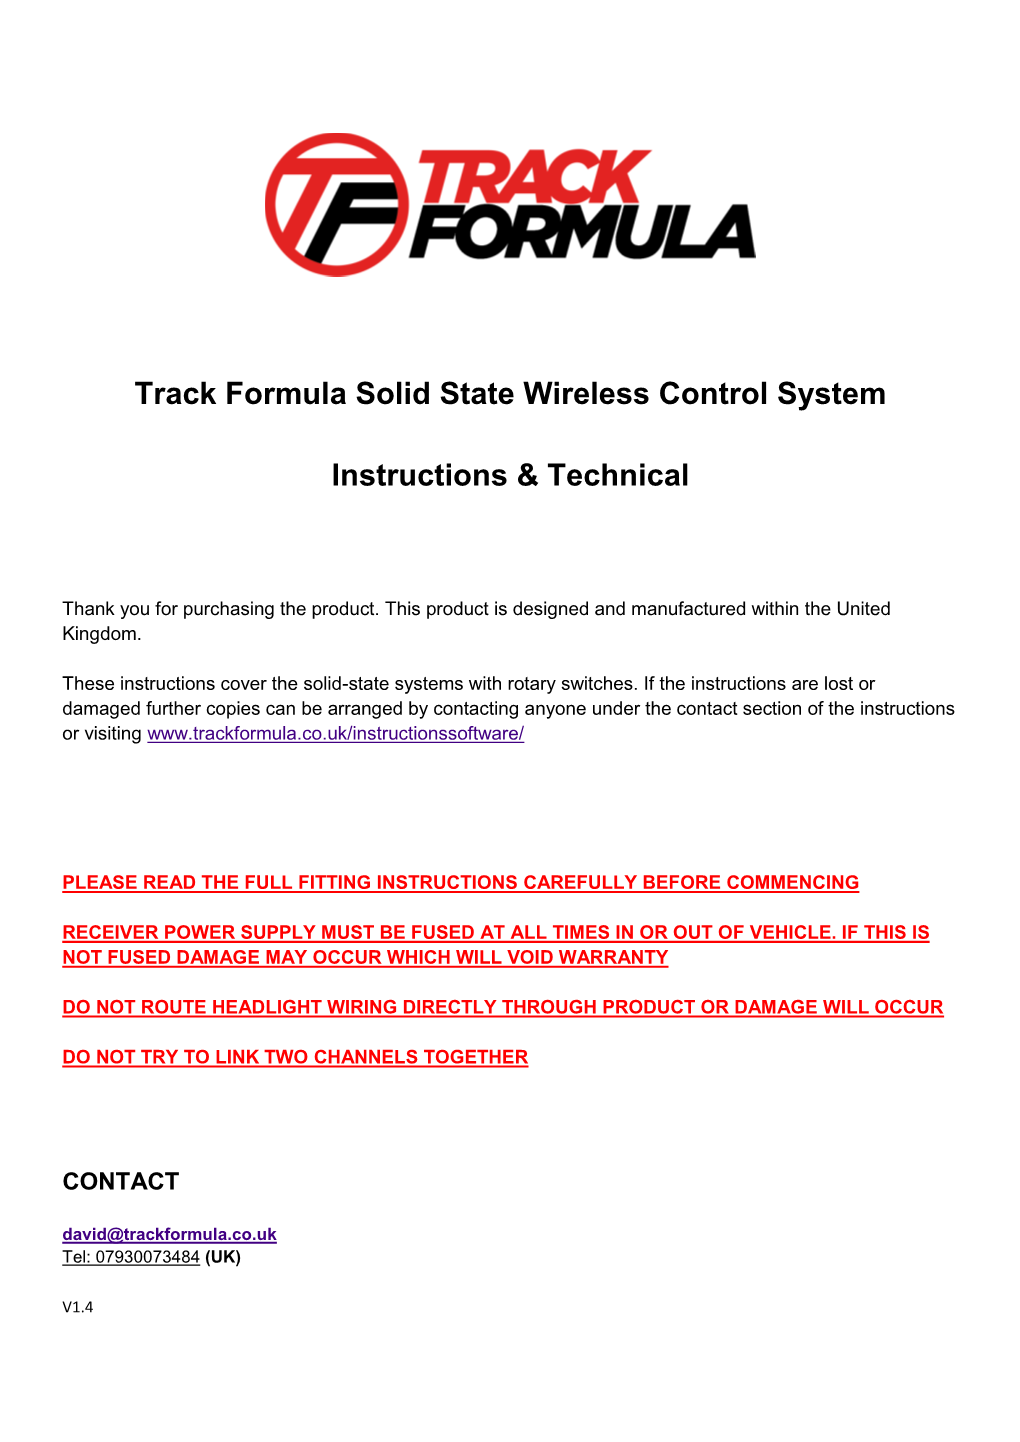 Track Formula Solid State Wireless Control System Instructions